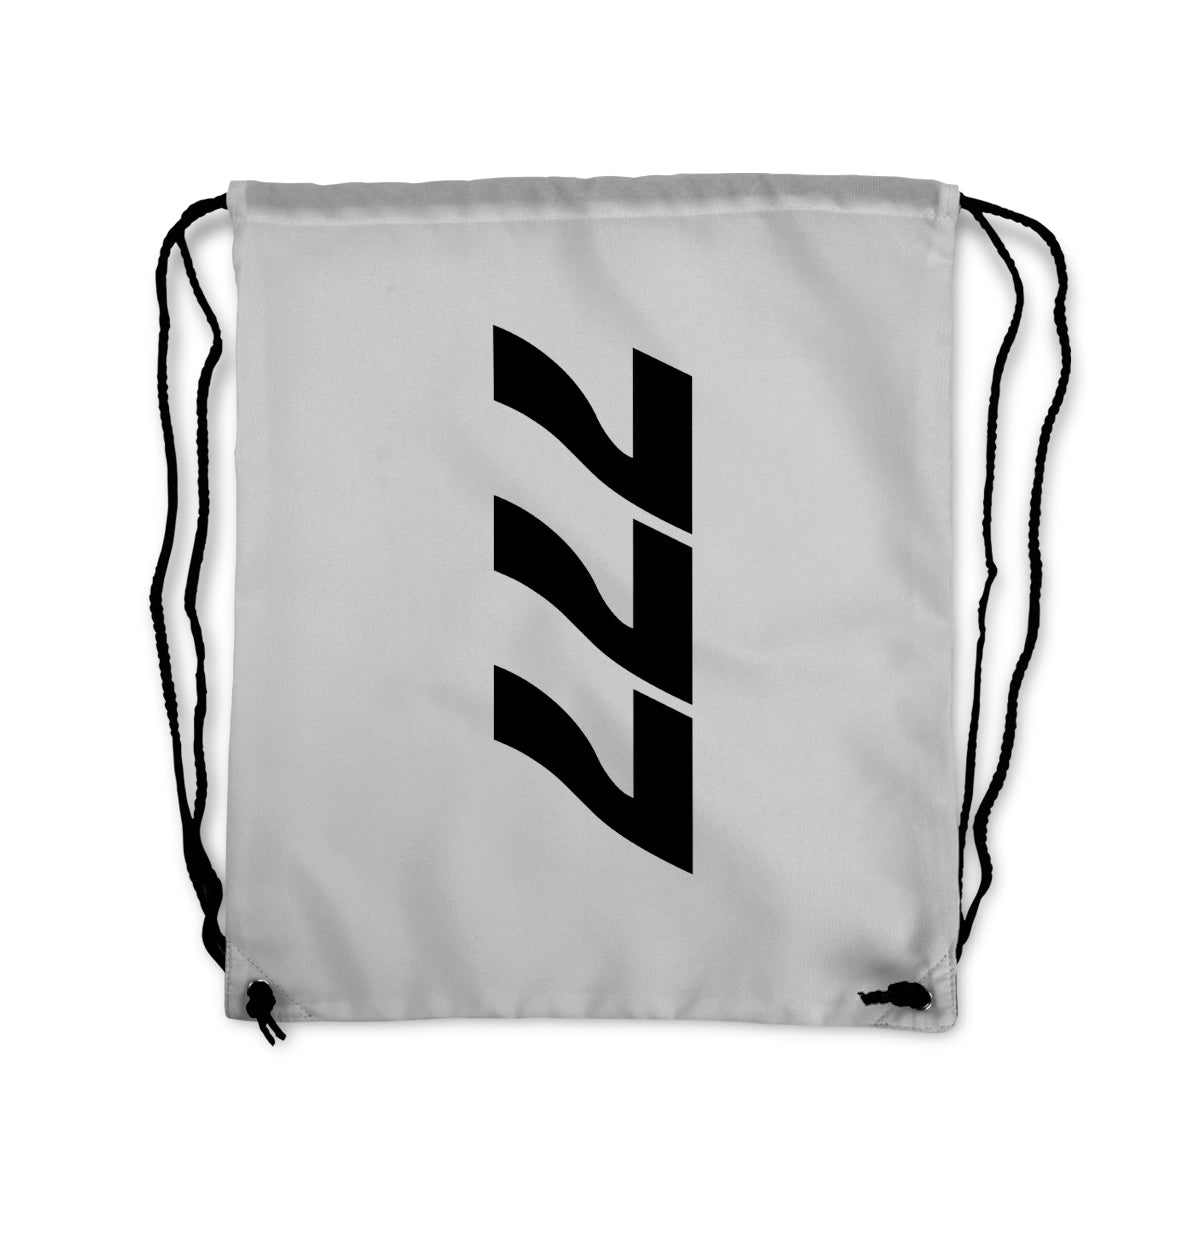 Boeing 777 Text Designed Drawstring Bags